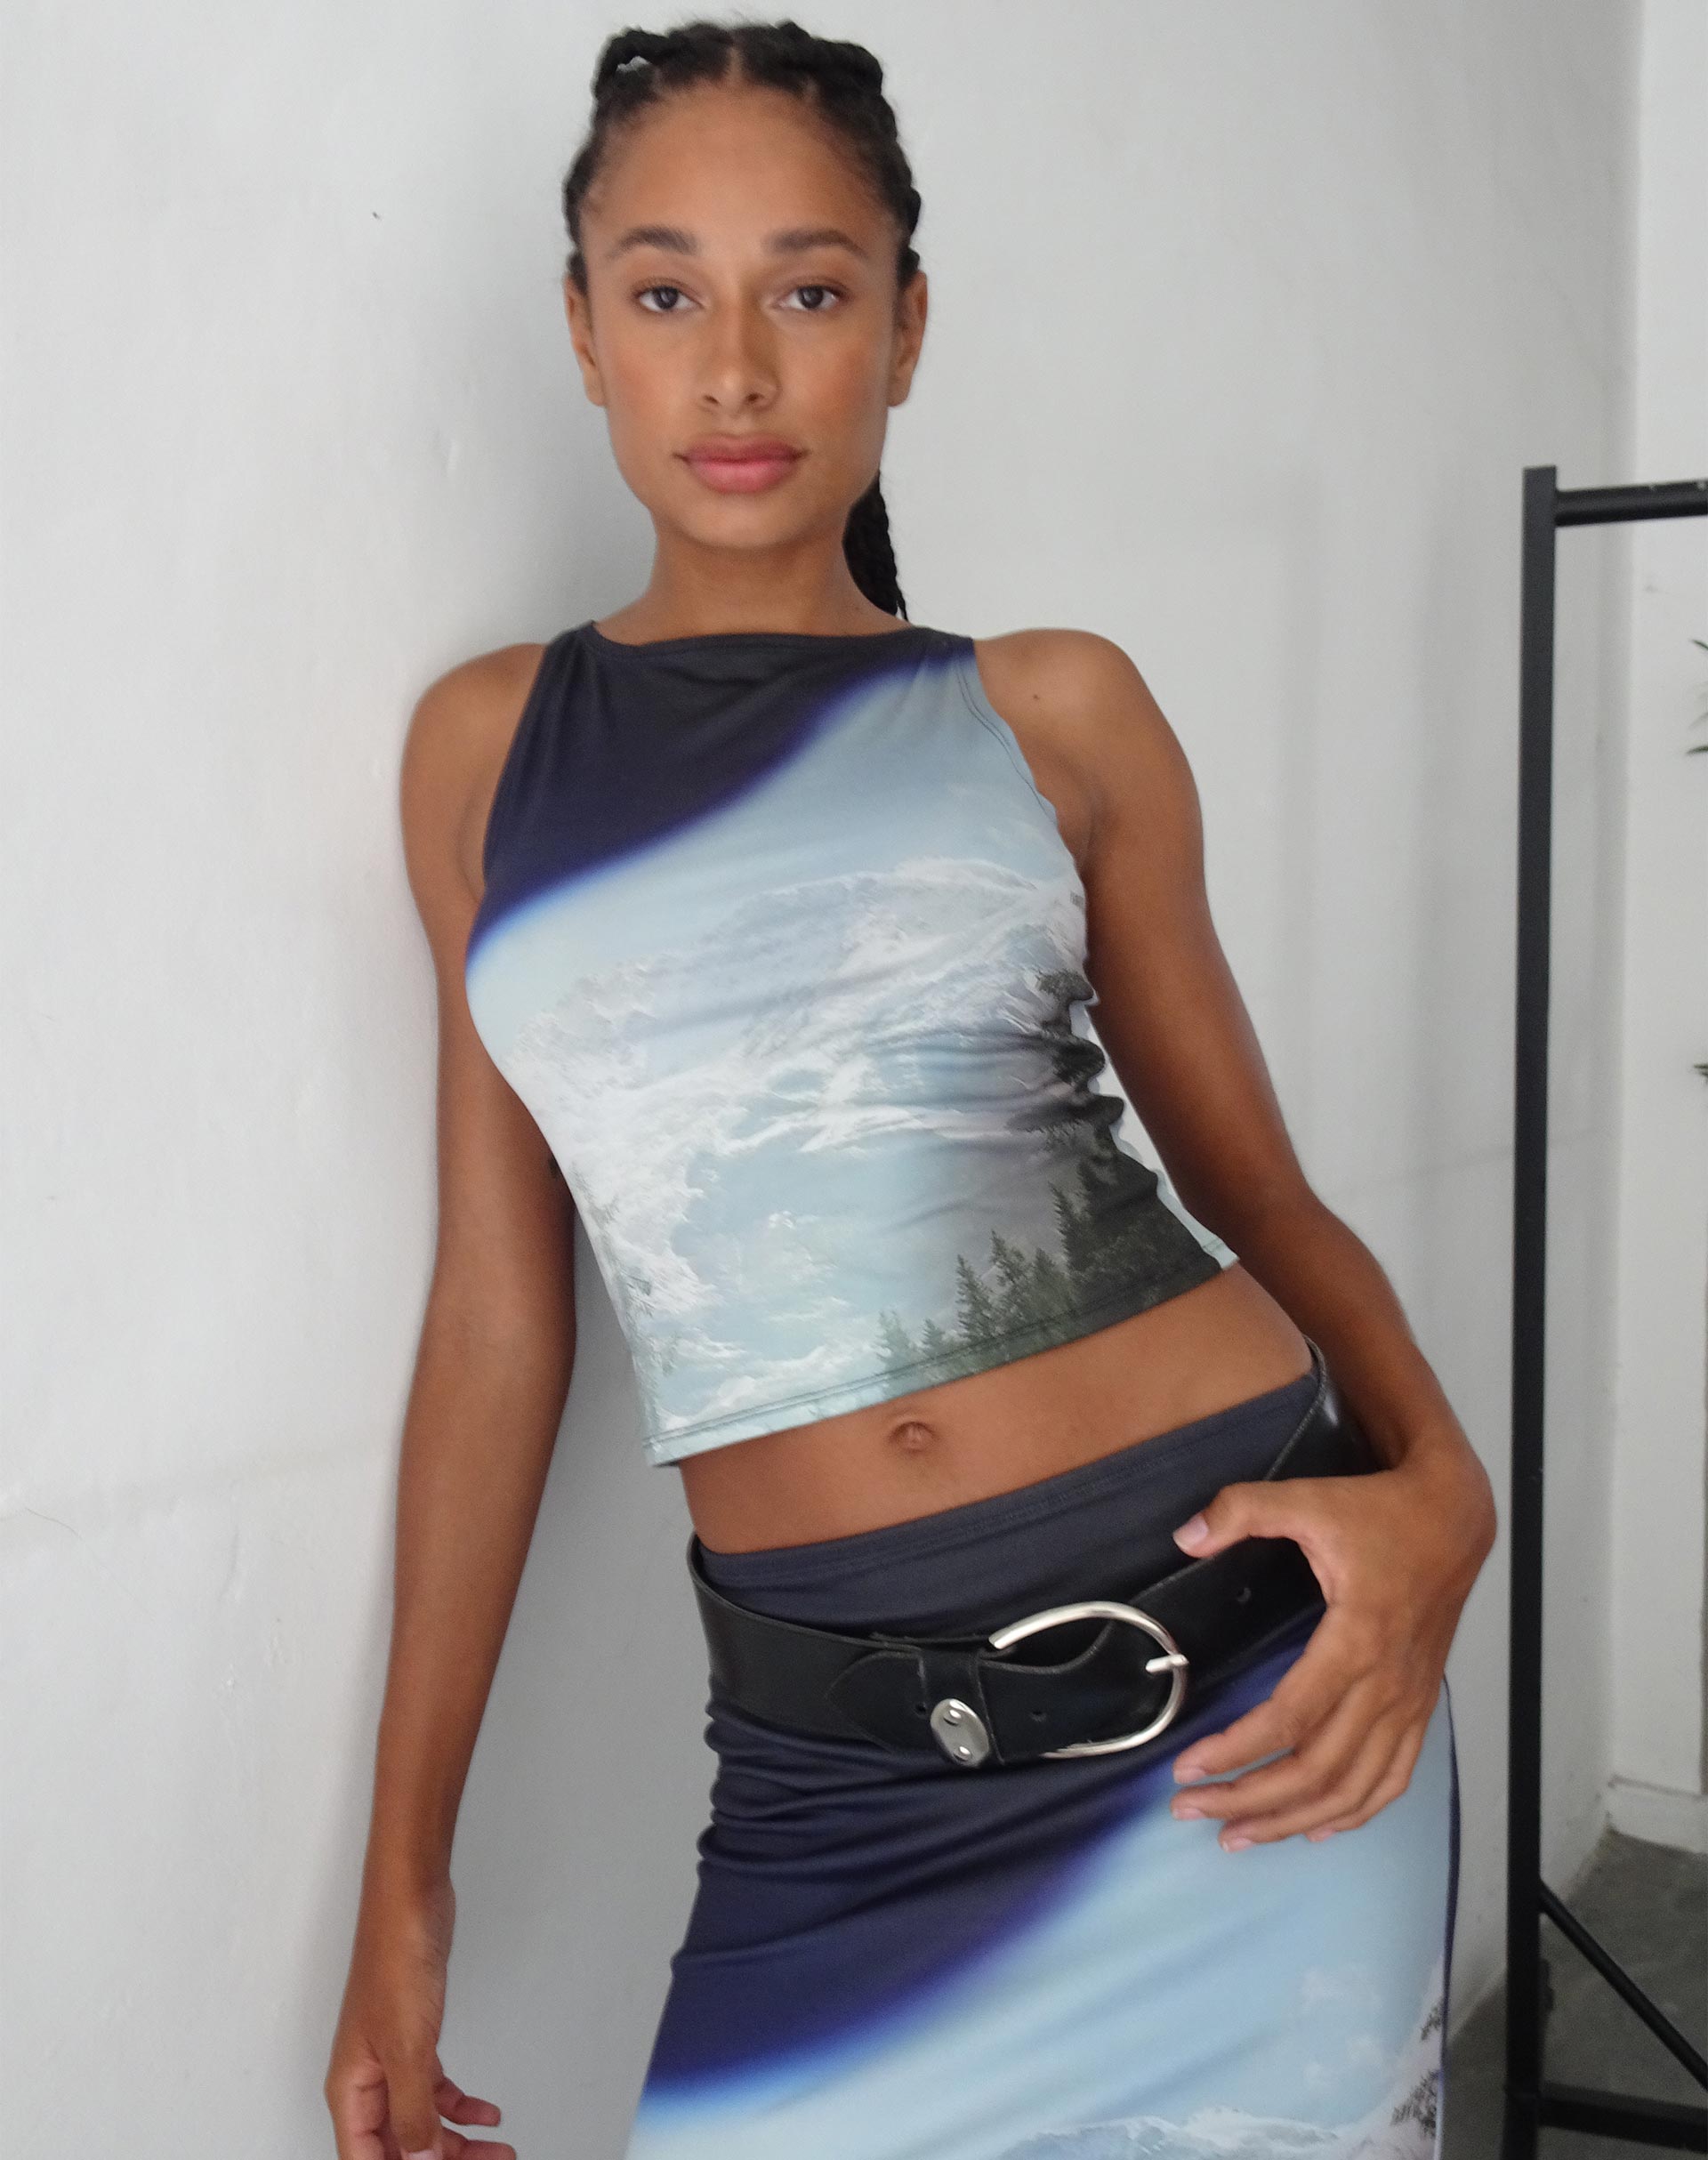 Image of Rambi Vest Crop Top in Abstract Landscape Collage